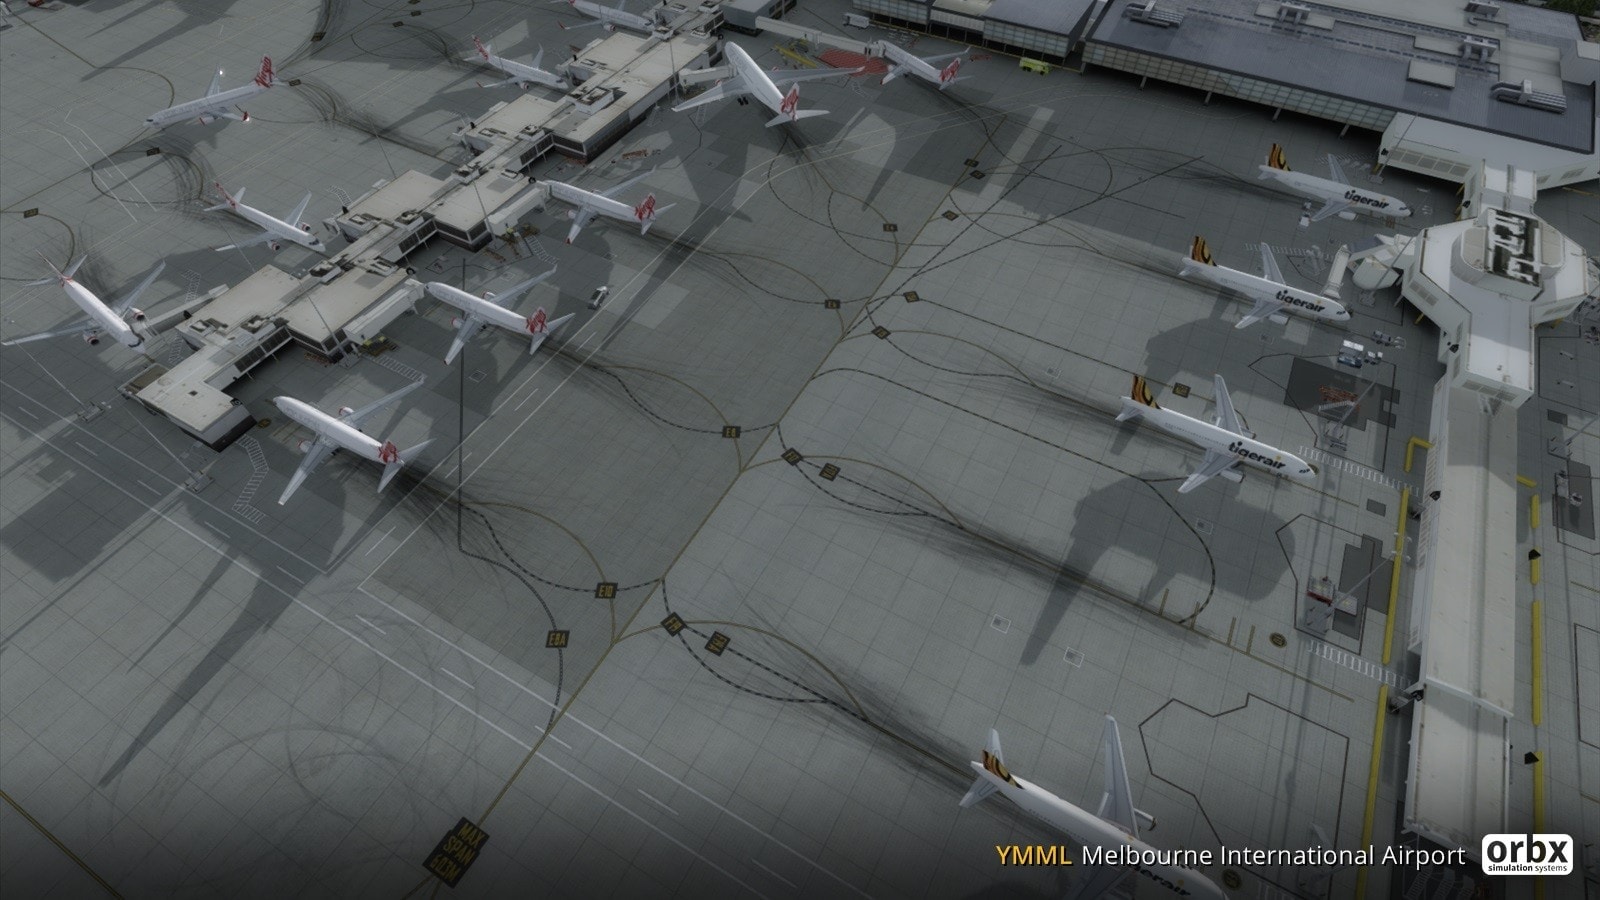 Melbourne Airport by Orbx for P3D as an example of what to expect.